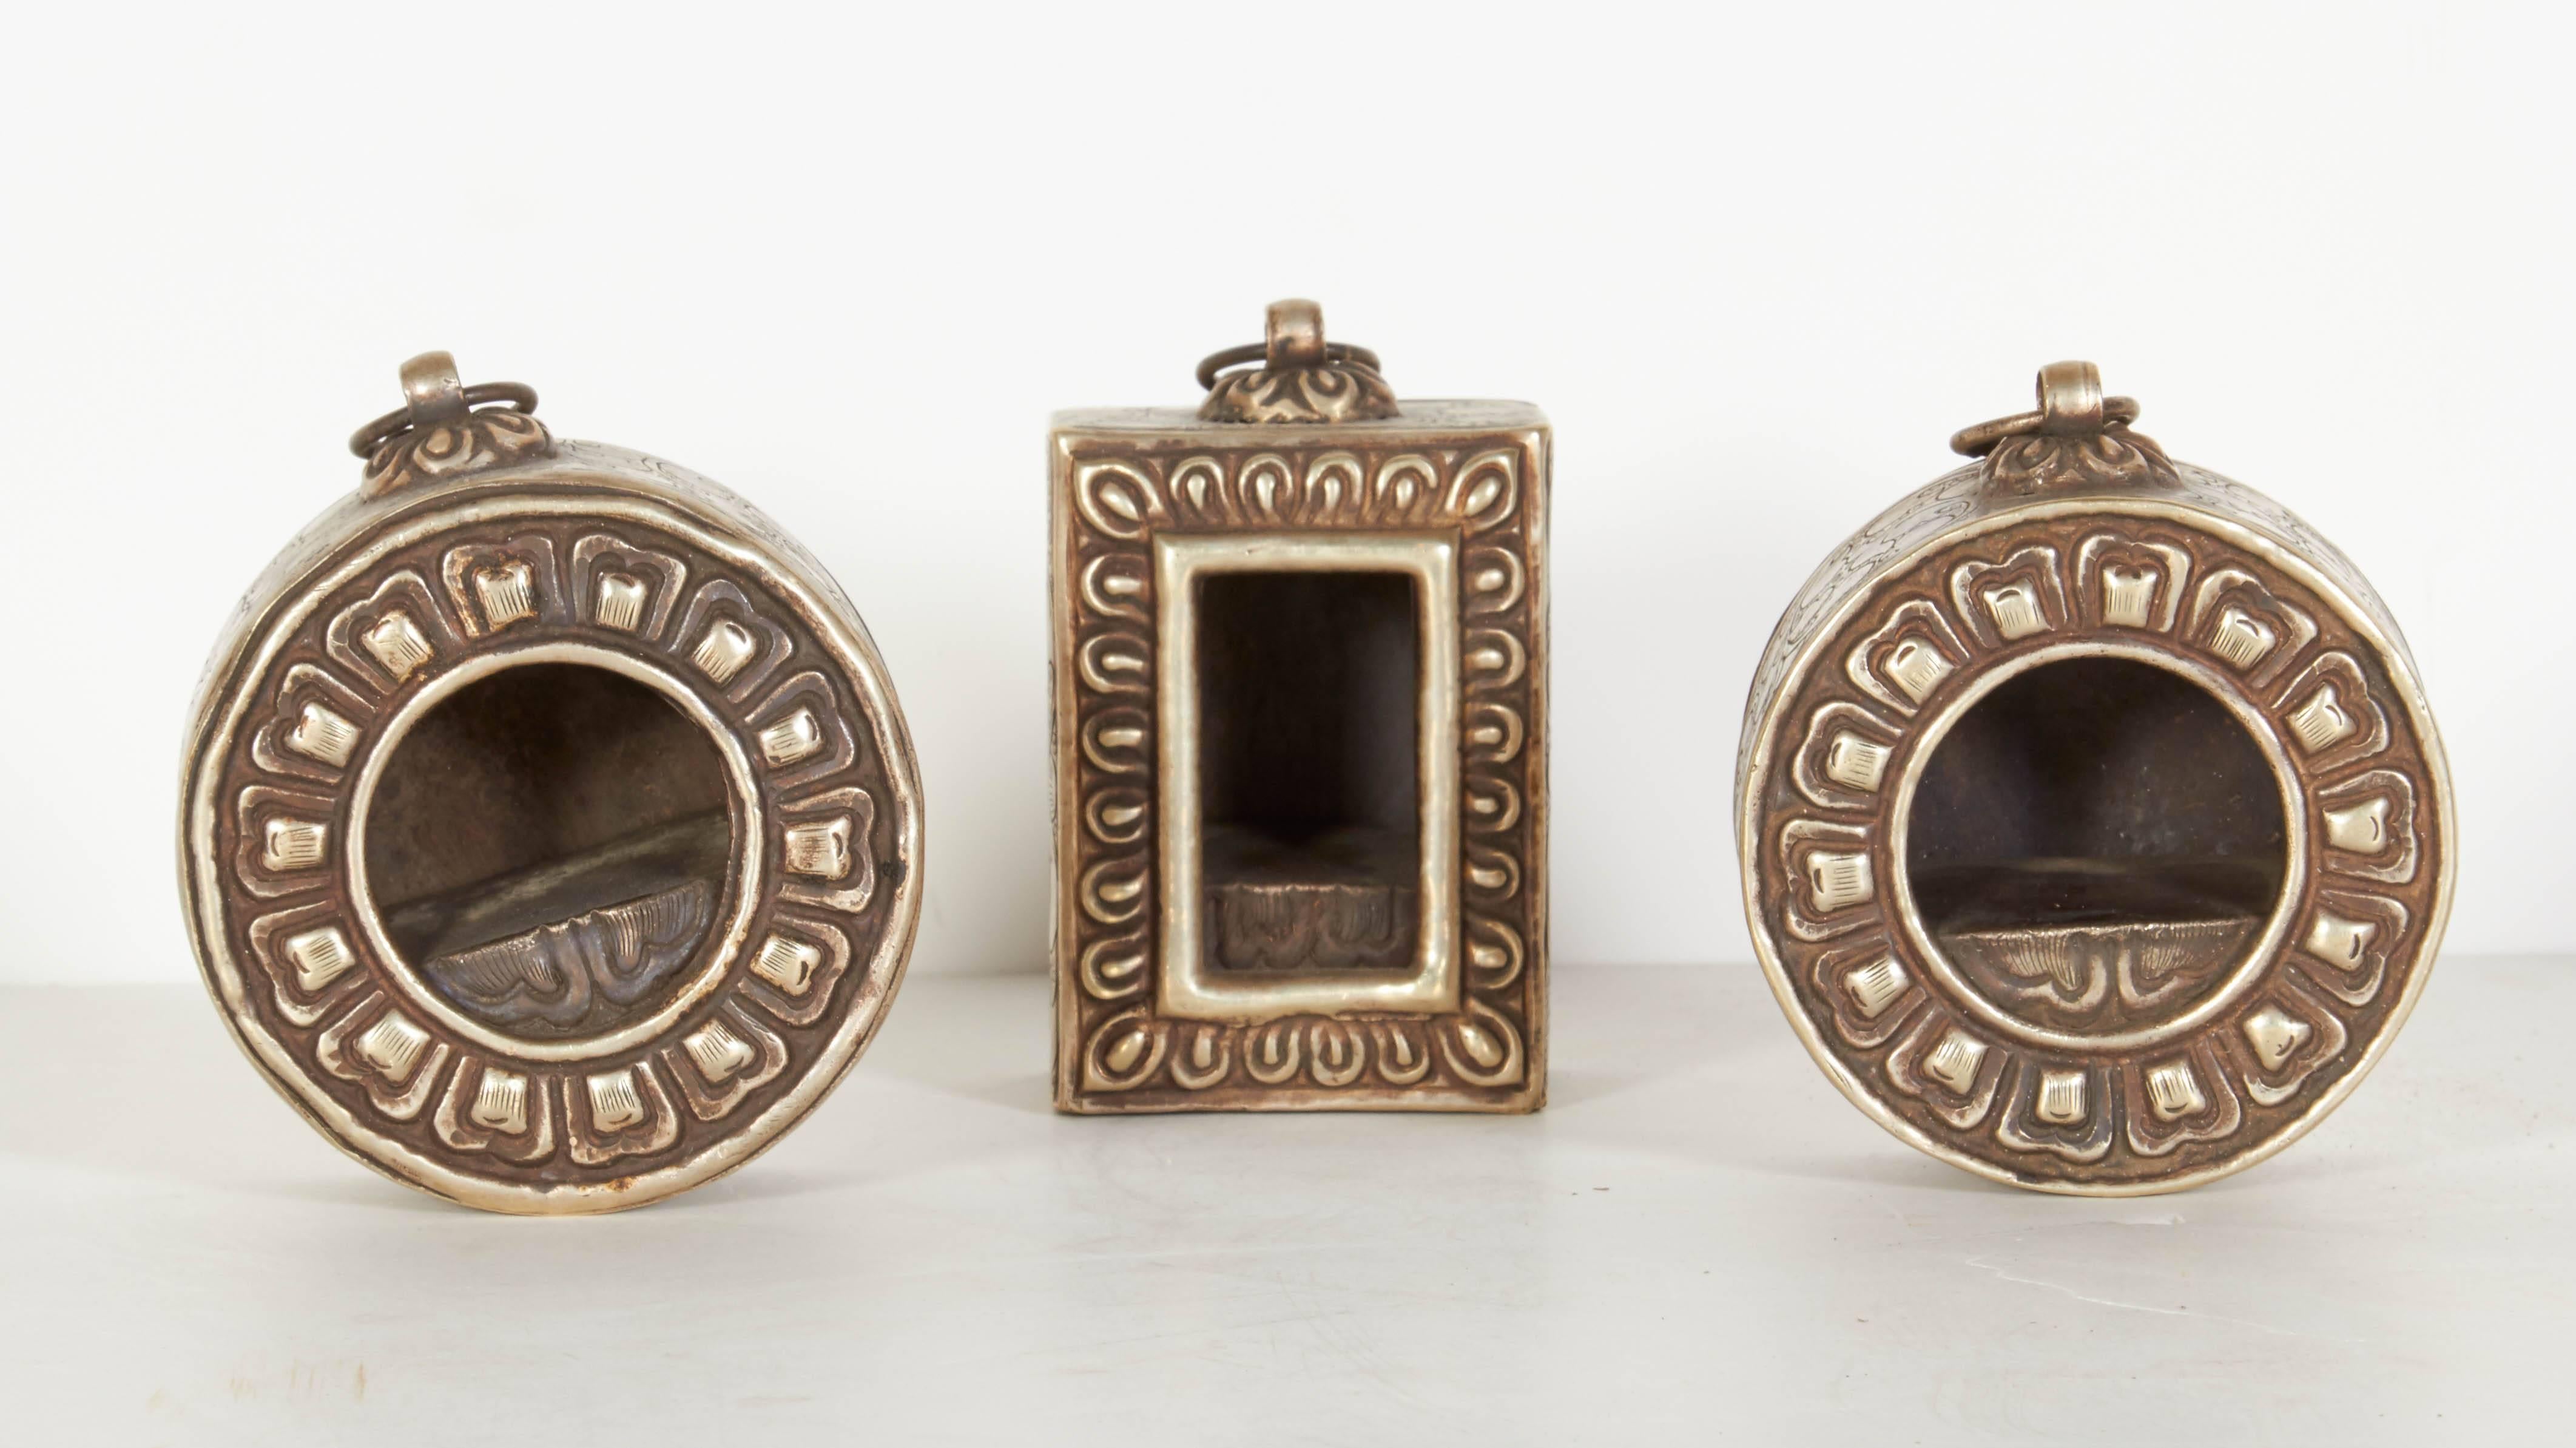 Three antique Tibetan Buddha shrines or prayer boxes (also known as Gaus). These three pieces are all beautifully engraved on Tibetan silver (an alloy of copper and small amounts of silver). These were used as traveling shrines or amulets carried on